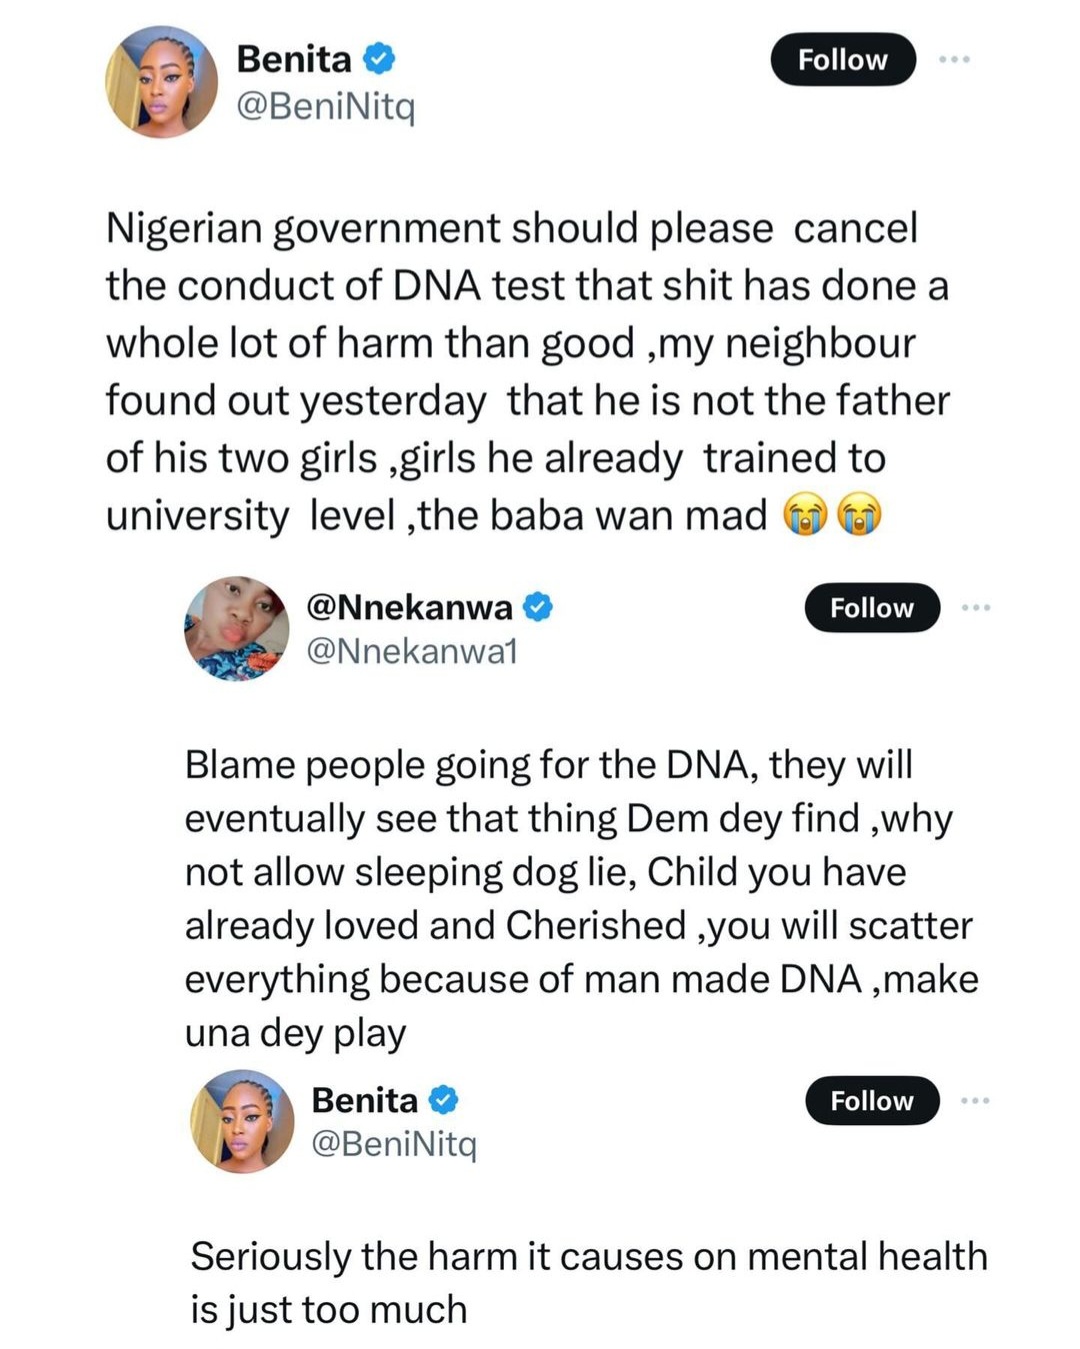 Government should ban DNA test in Nigeria - Women say and give reasons